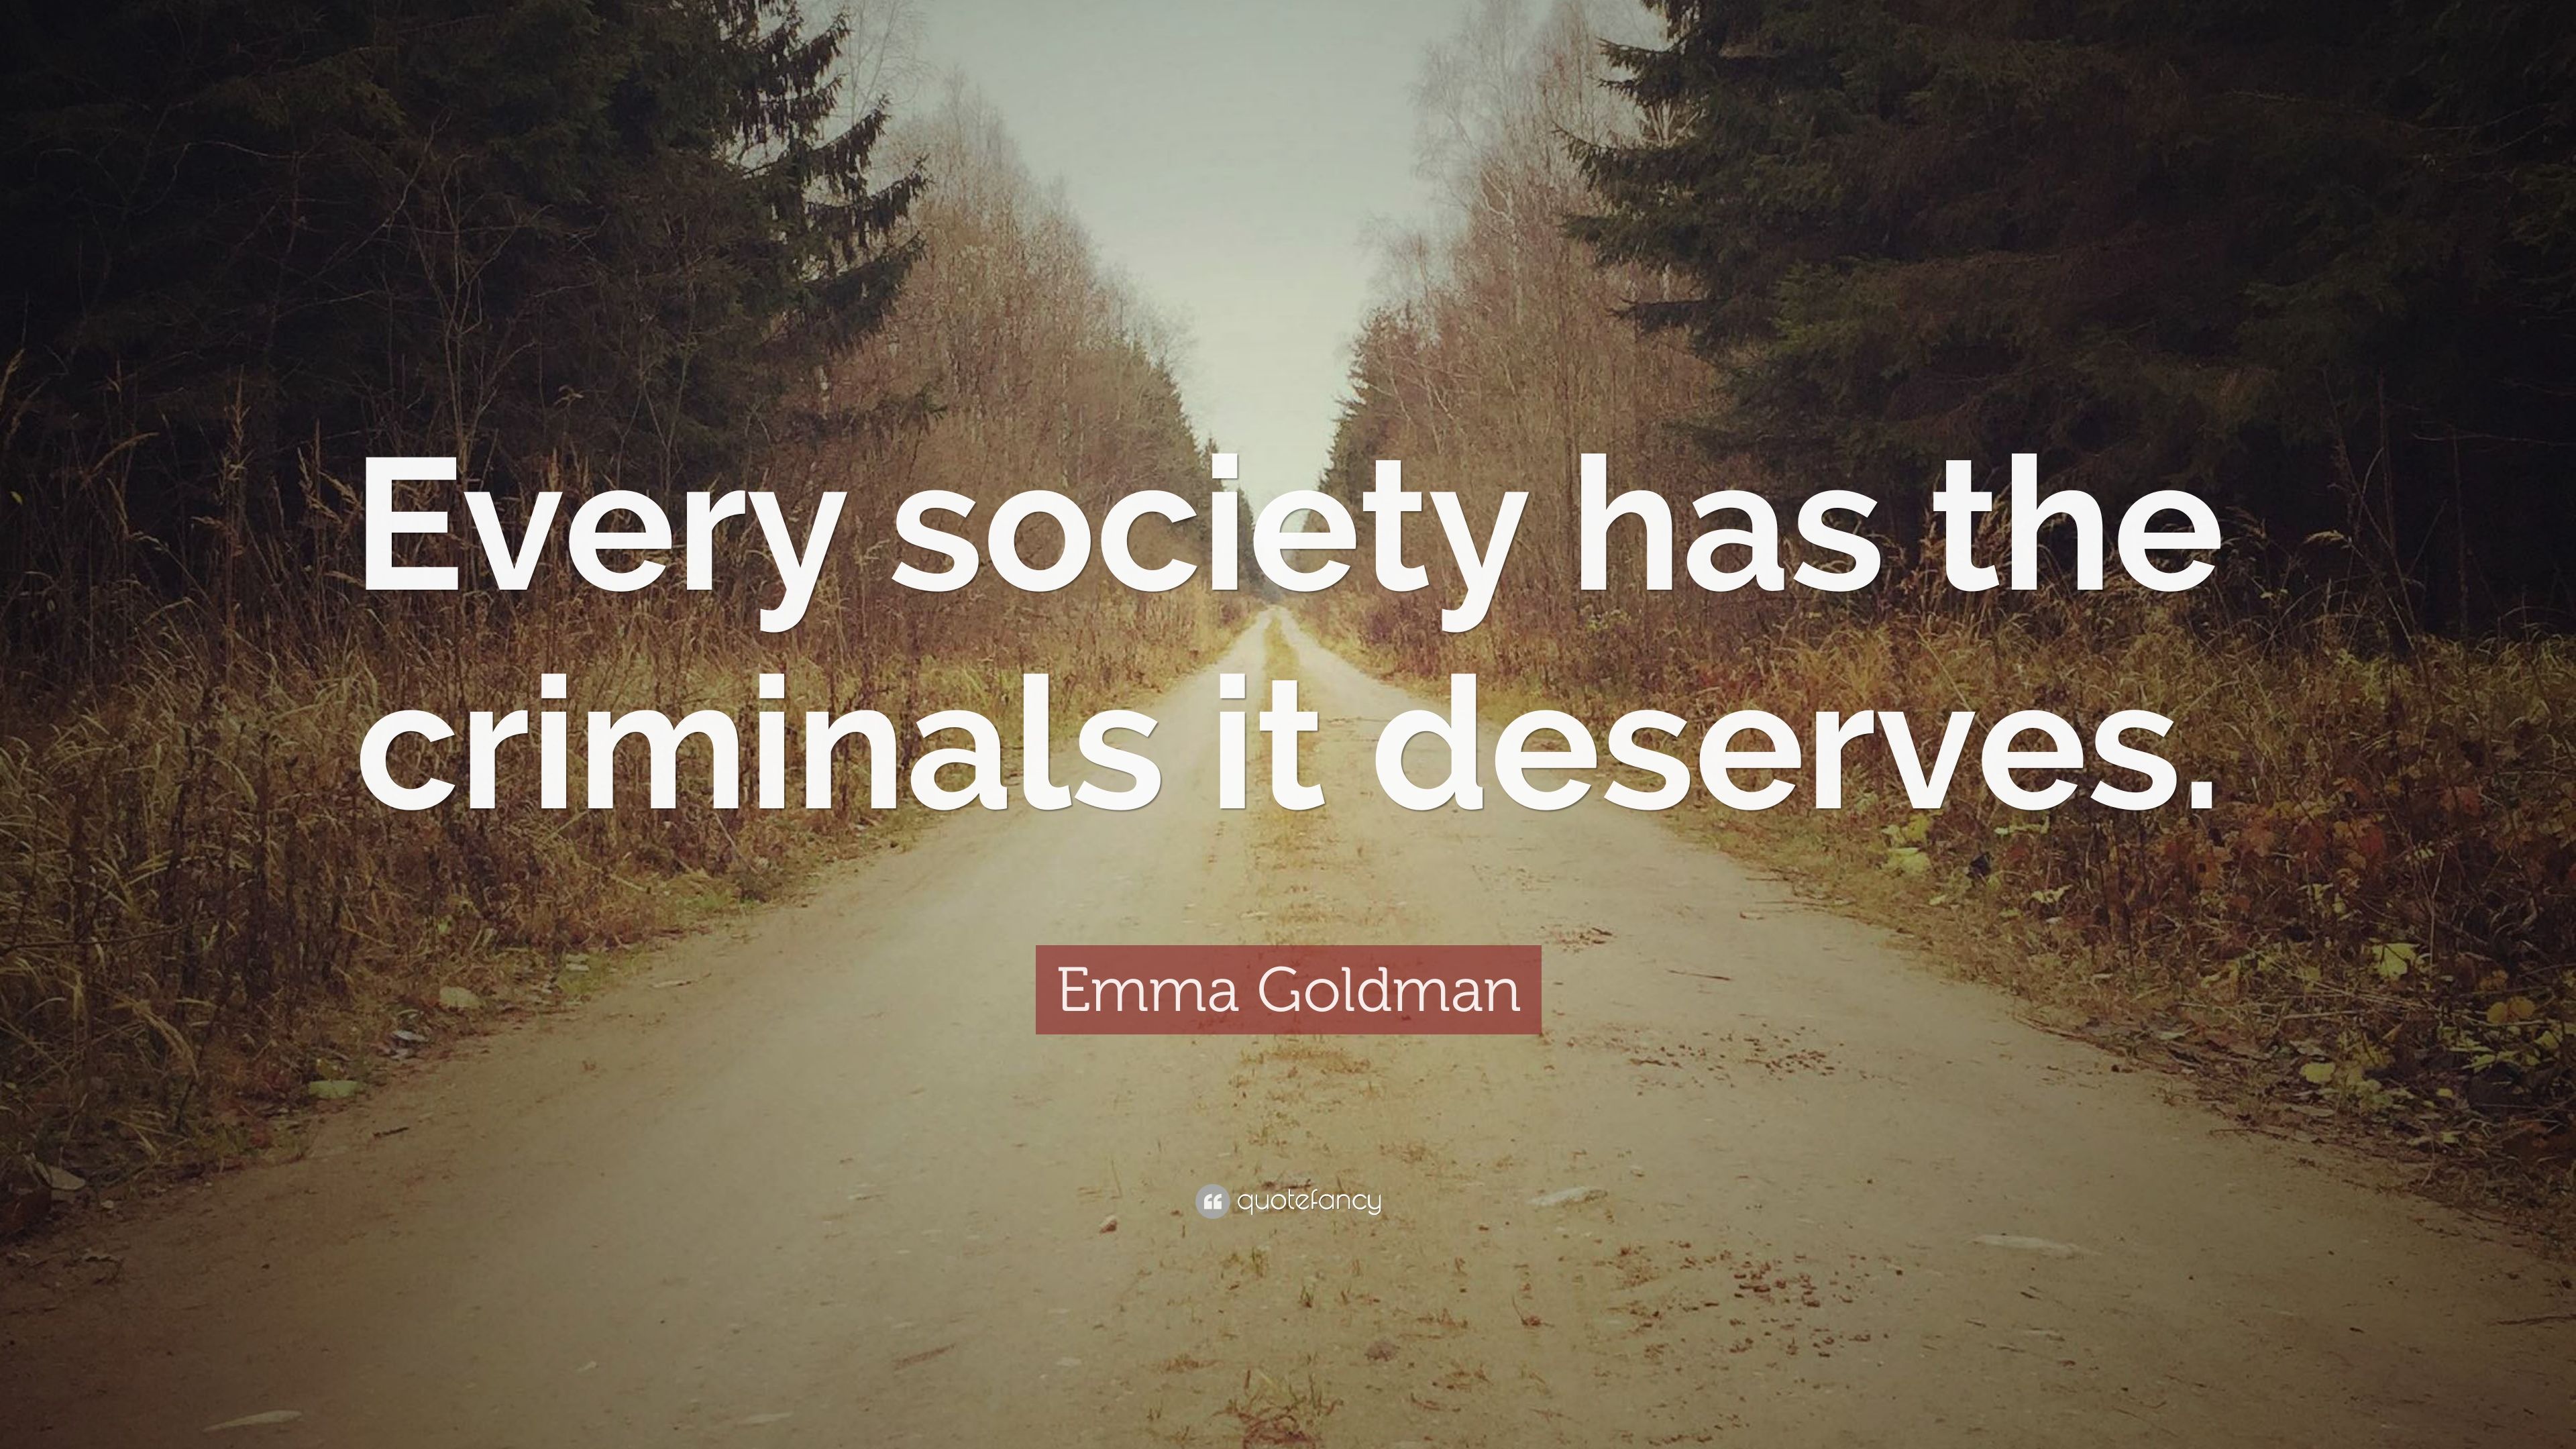 Emma Goldman Quote: “Every society has the criminals it deserves